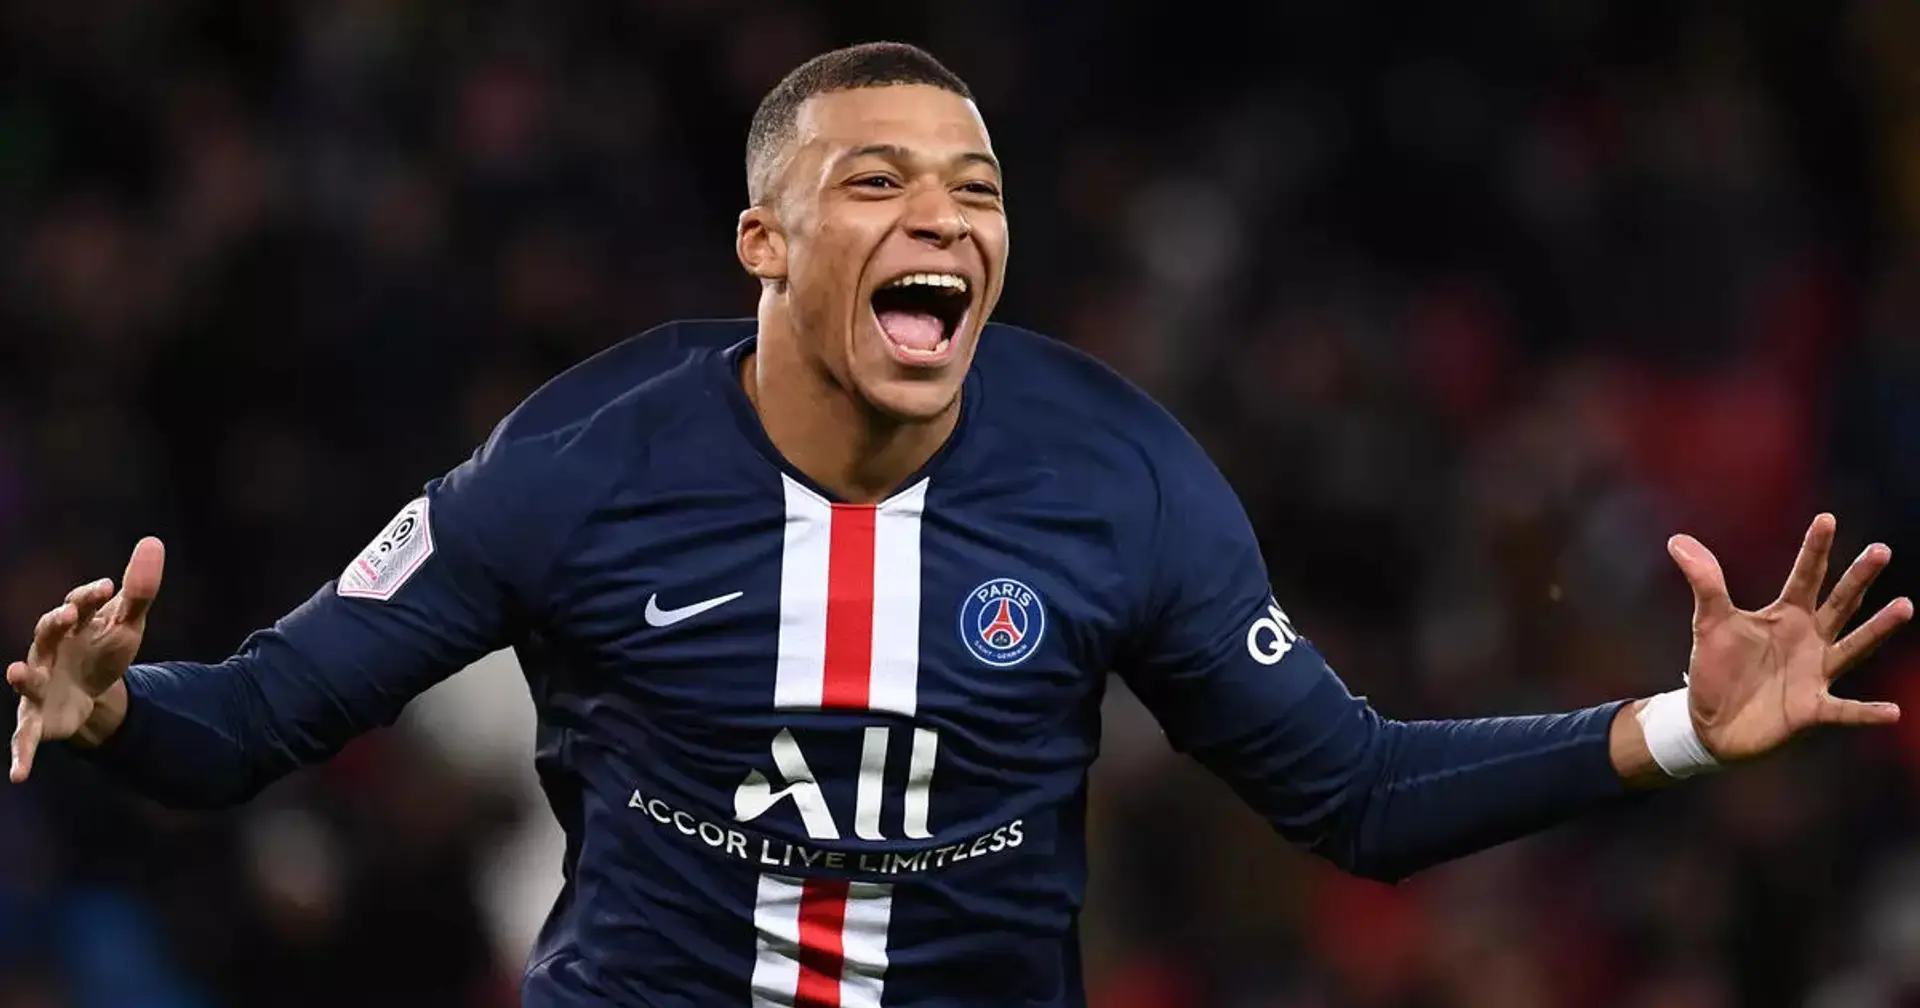 'Mbappe's pace is deadly', 'Hope we beat them like last time': Tribuna users' views on United facing PSG in the Champions League